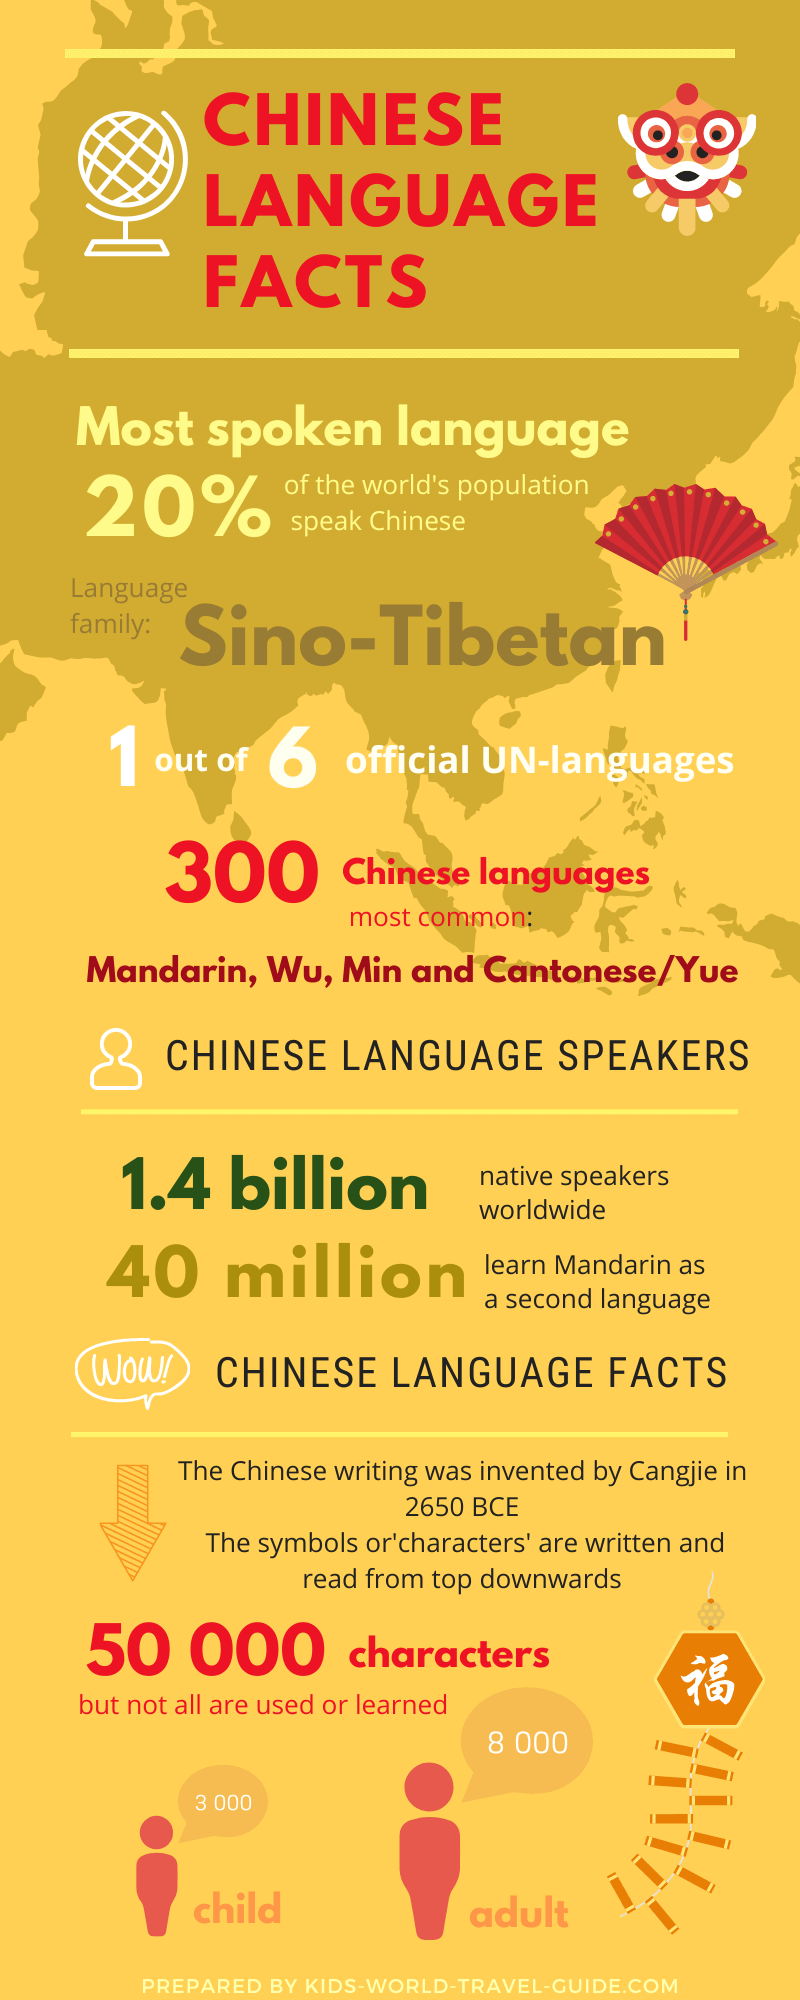 Chinese Language Facts Infographic by Kids World Travel Guide